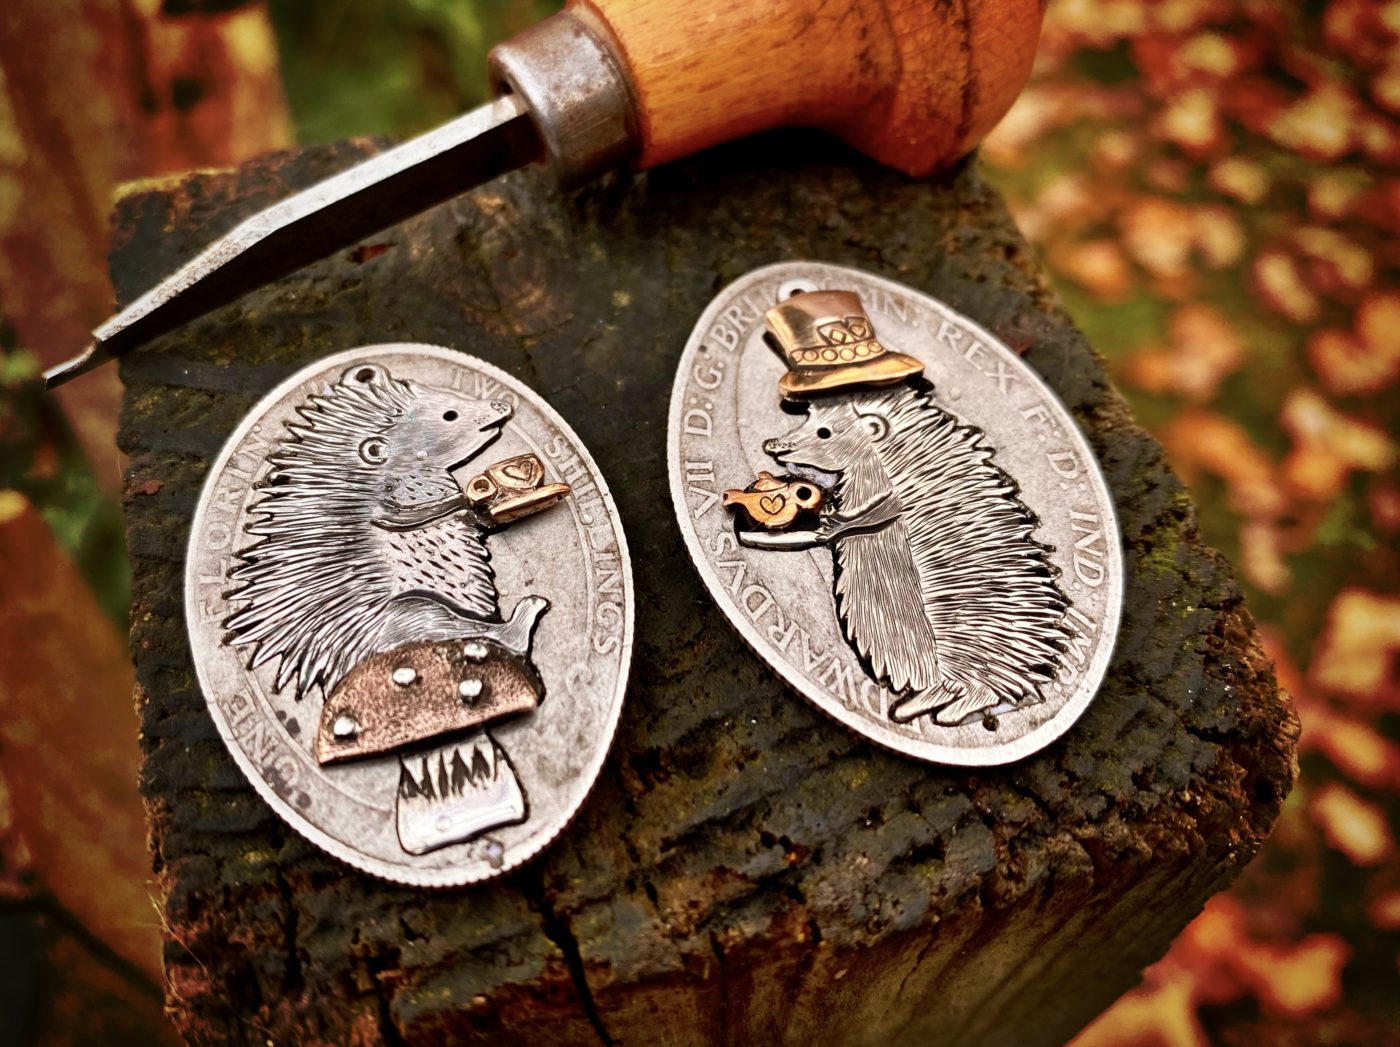 a hedgehog gathering, necklaces made from old silver coins